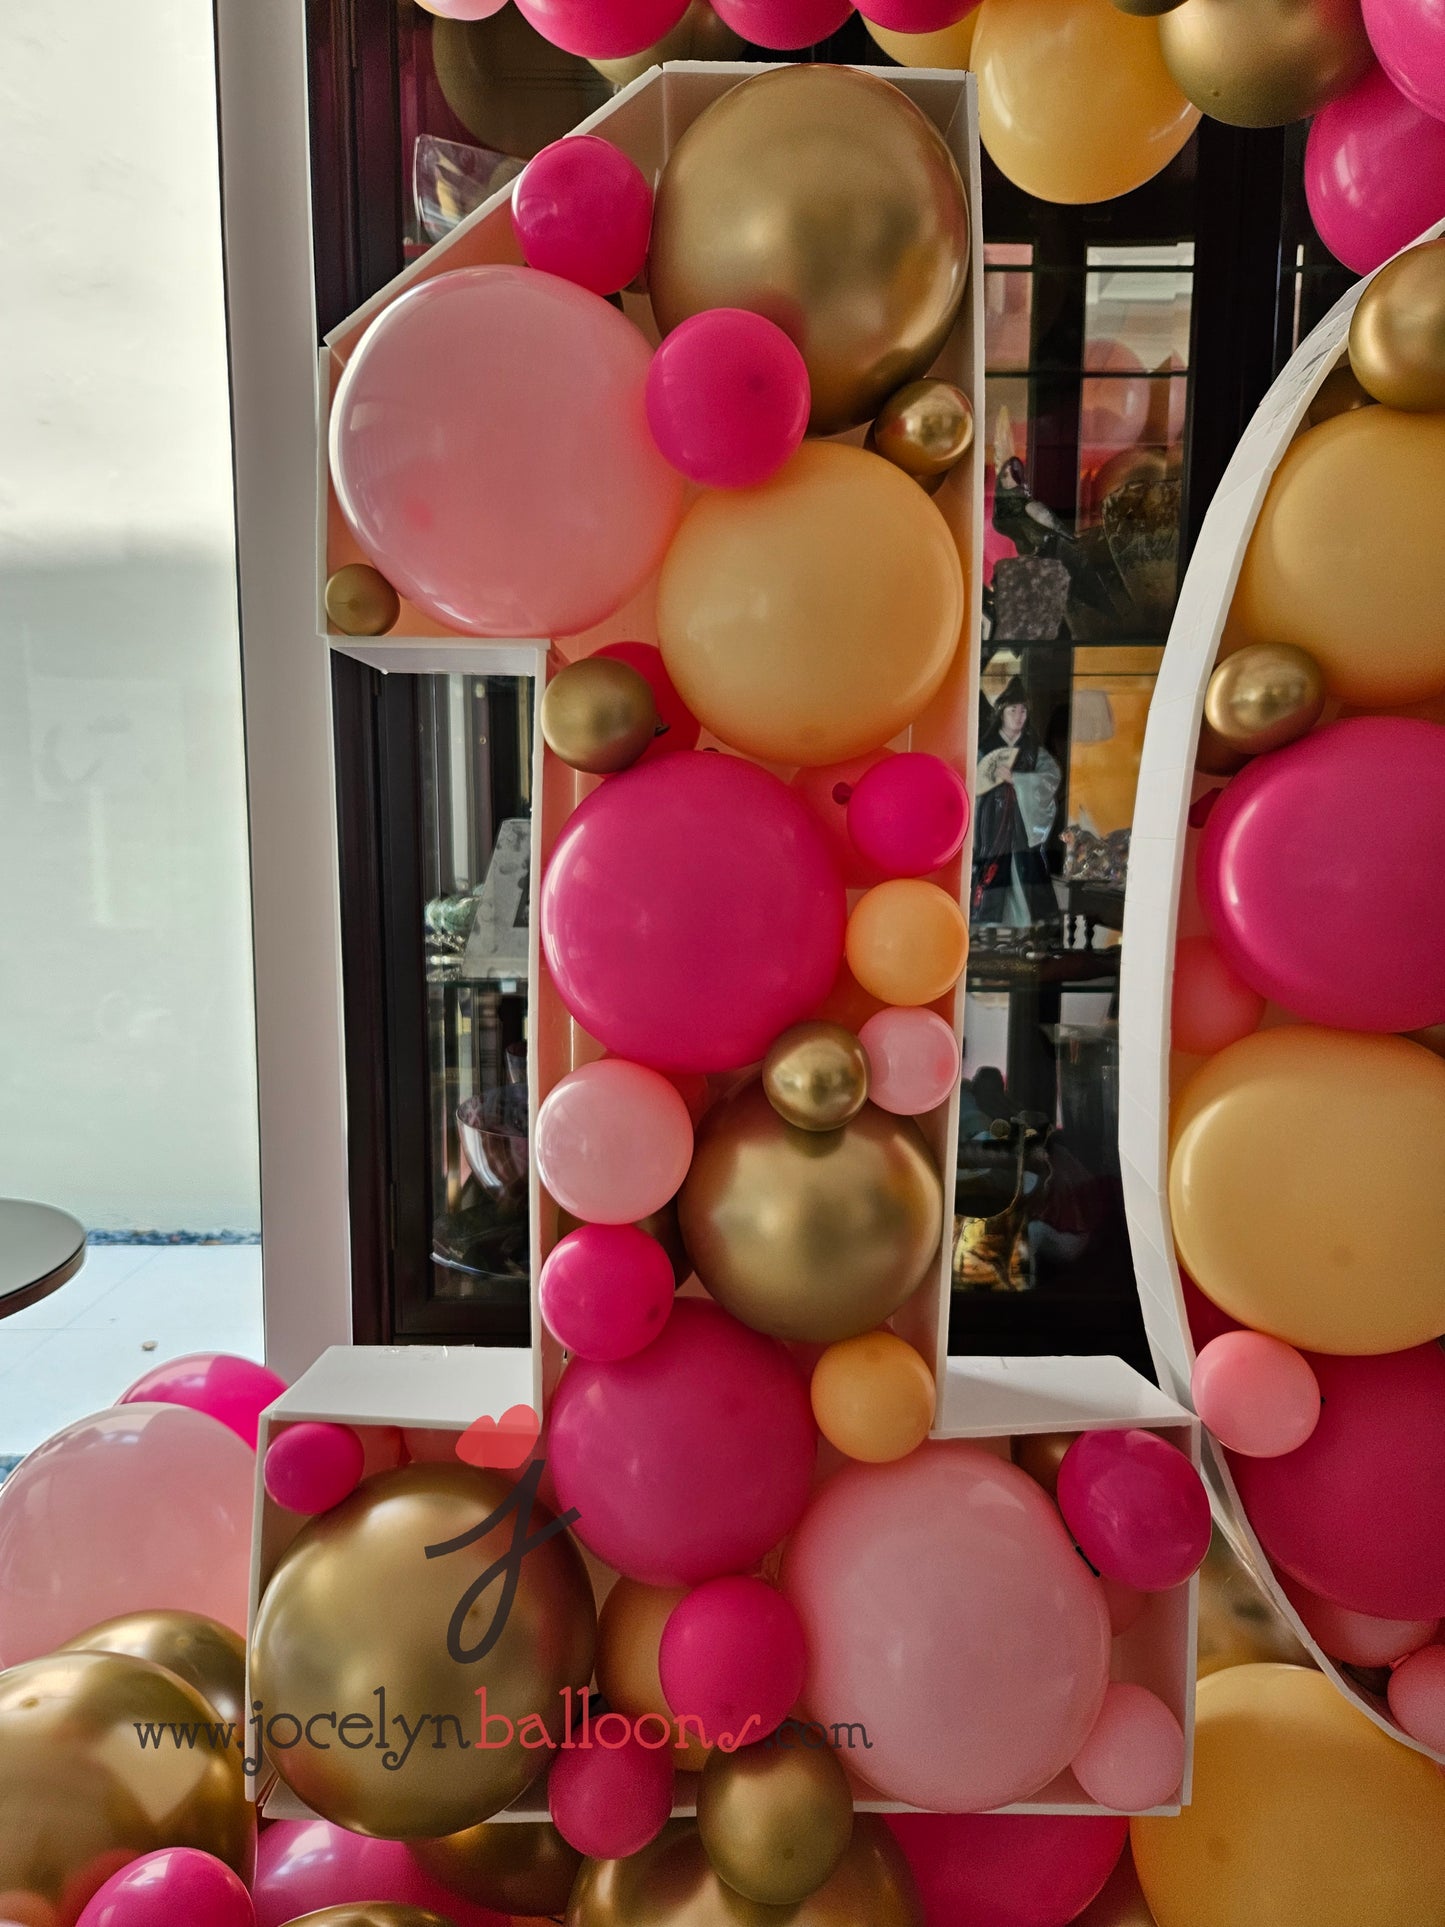 "16" Marquee Letters With Organic Balloon Garland